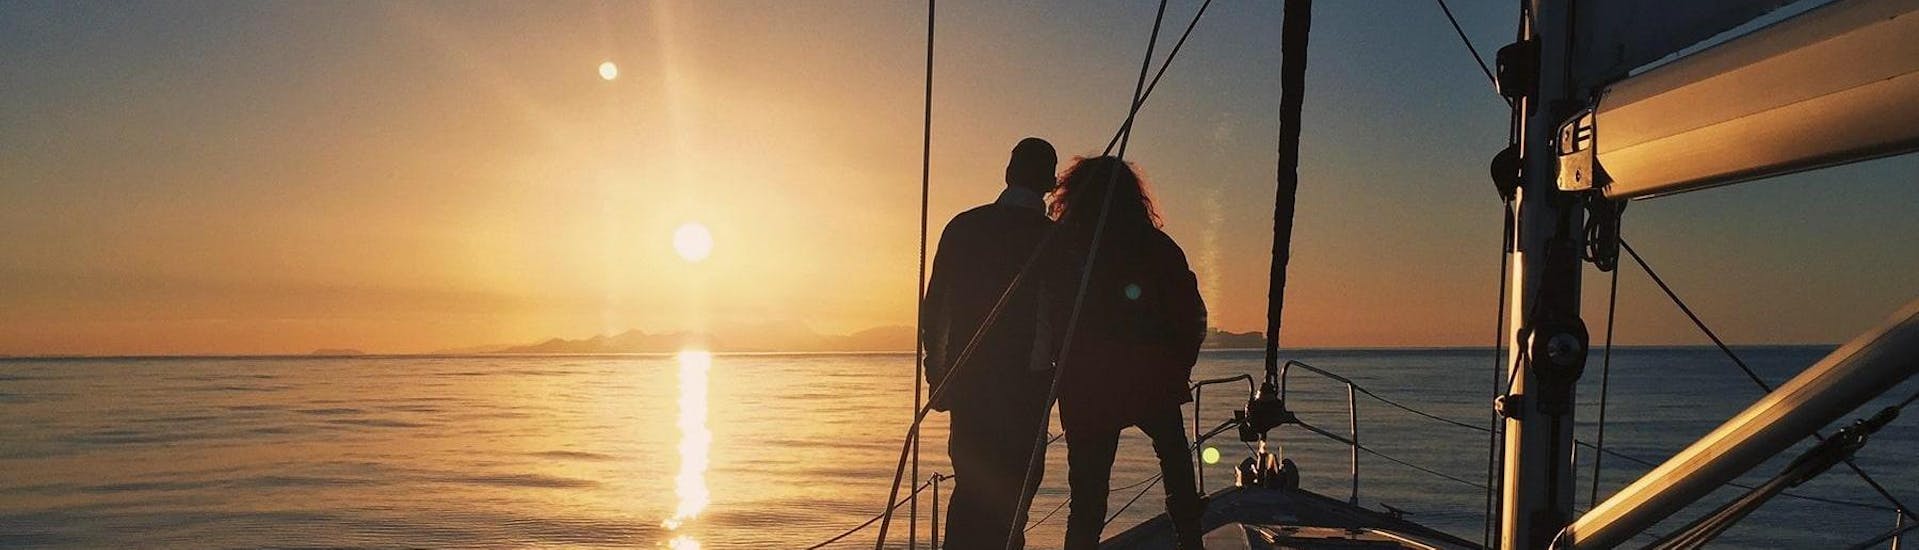 A couple is having a romantic evening during the Private Sunset Sailing Tour around Barcelona (up to 11pax) organised by Five Star Barcelona.